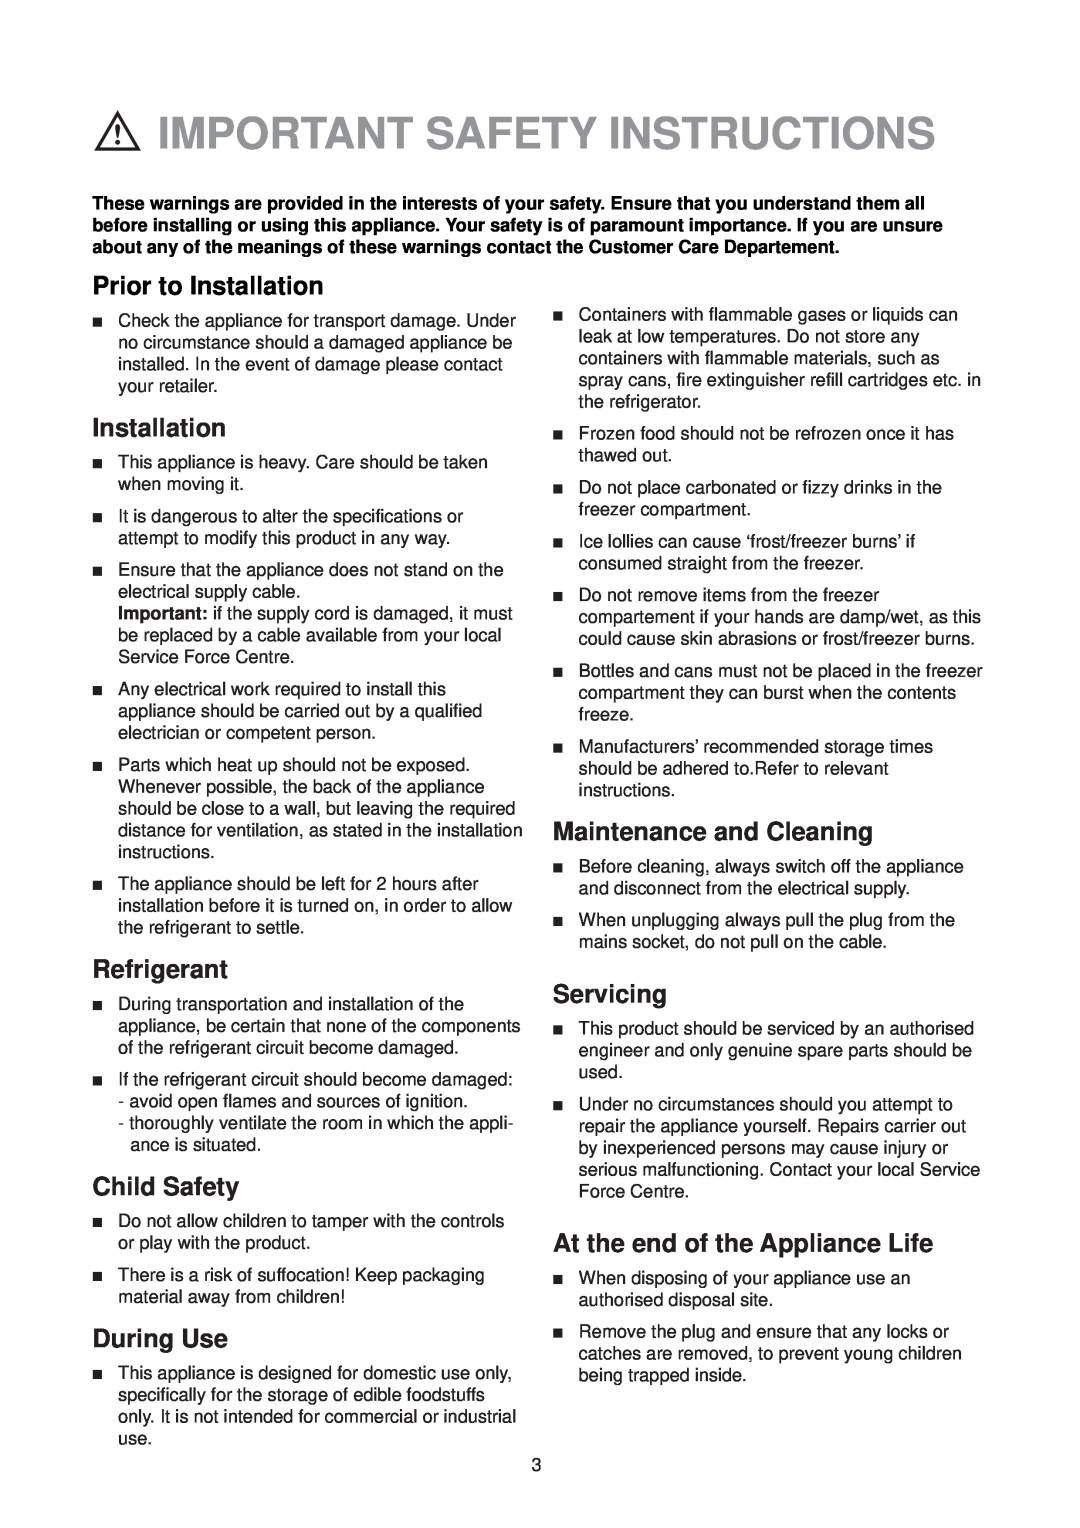 Electrolux EU 6321 Important Safety Instructions, Prior to Installation, Refrigerant, Child Safety, During Use, Servicing 